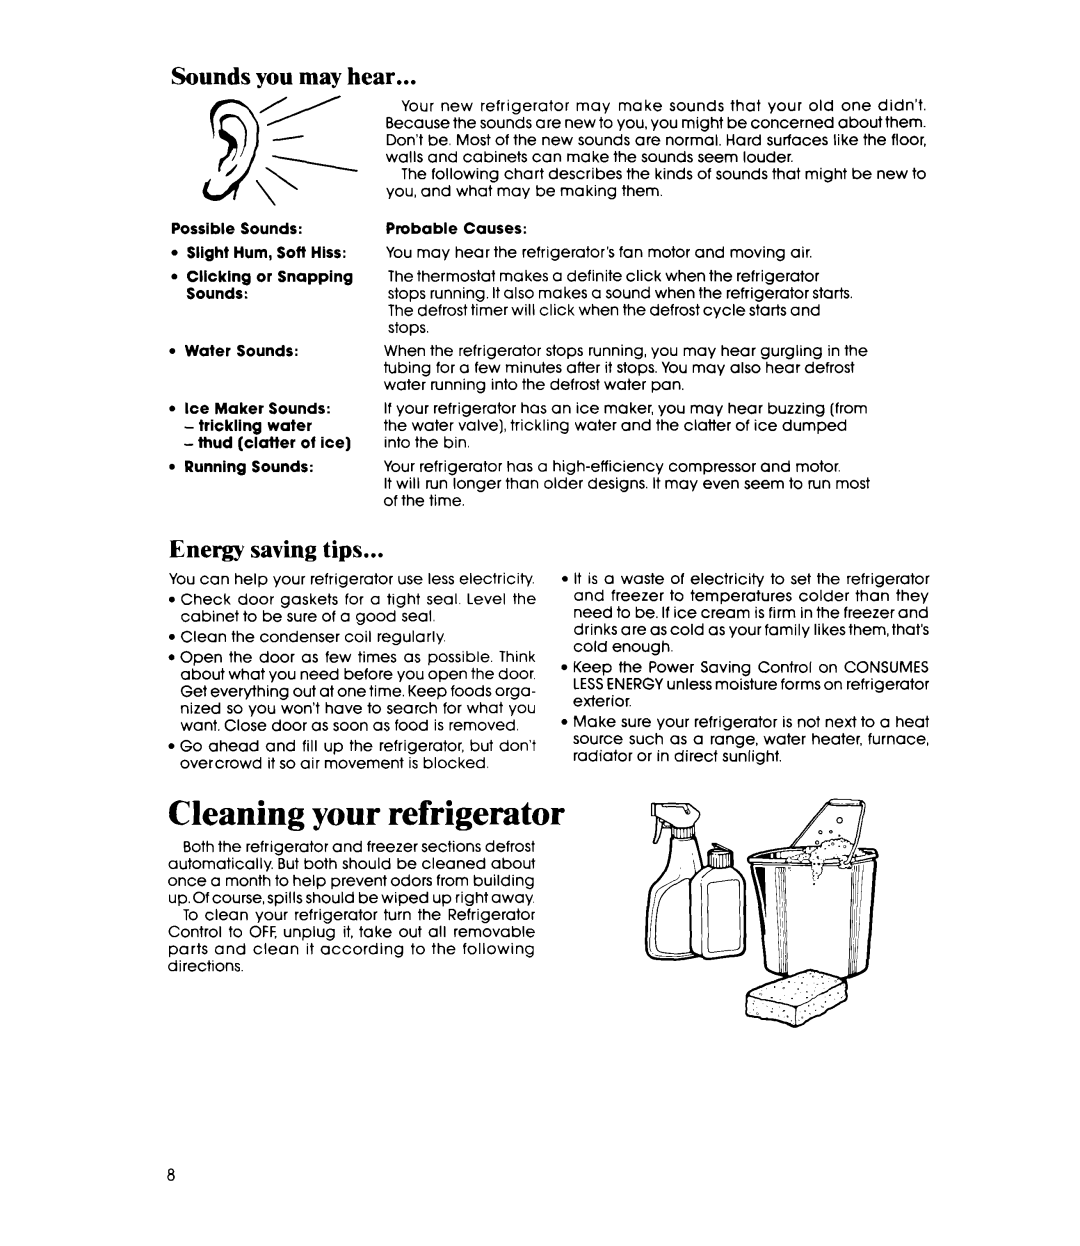 Whirlpool ET18VK, ET18XK manual Cleaning your refrigerator, Sounds you may hear, Energy saving tips, ’ 